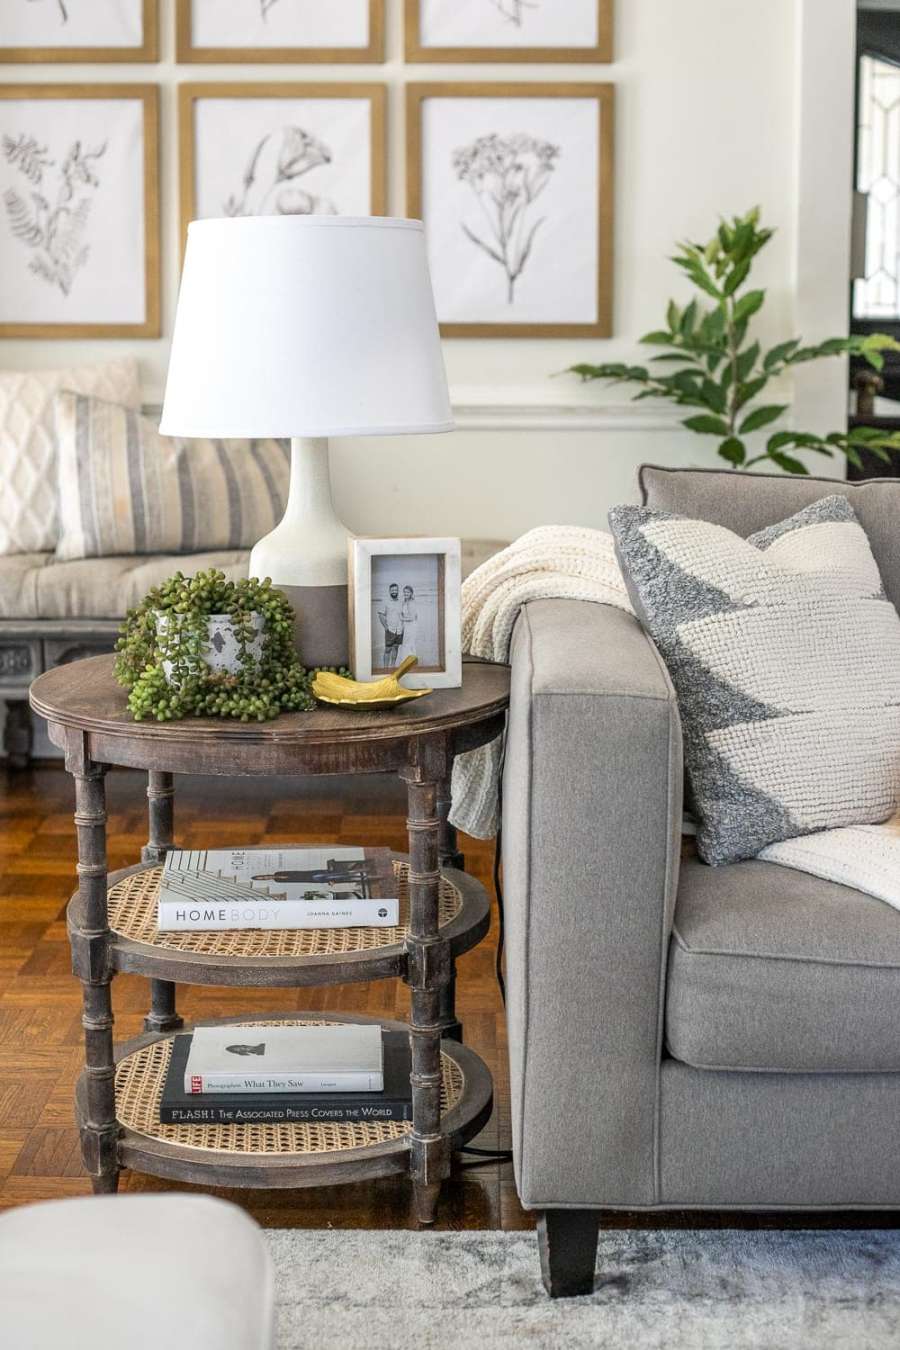 Simplified Decorating: End Table Decor Ideas - Bless